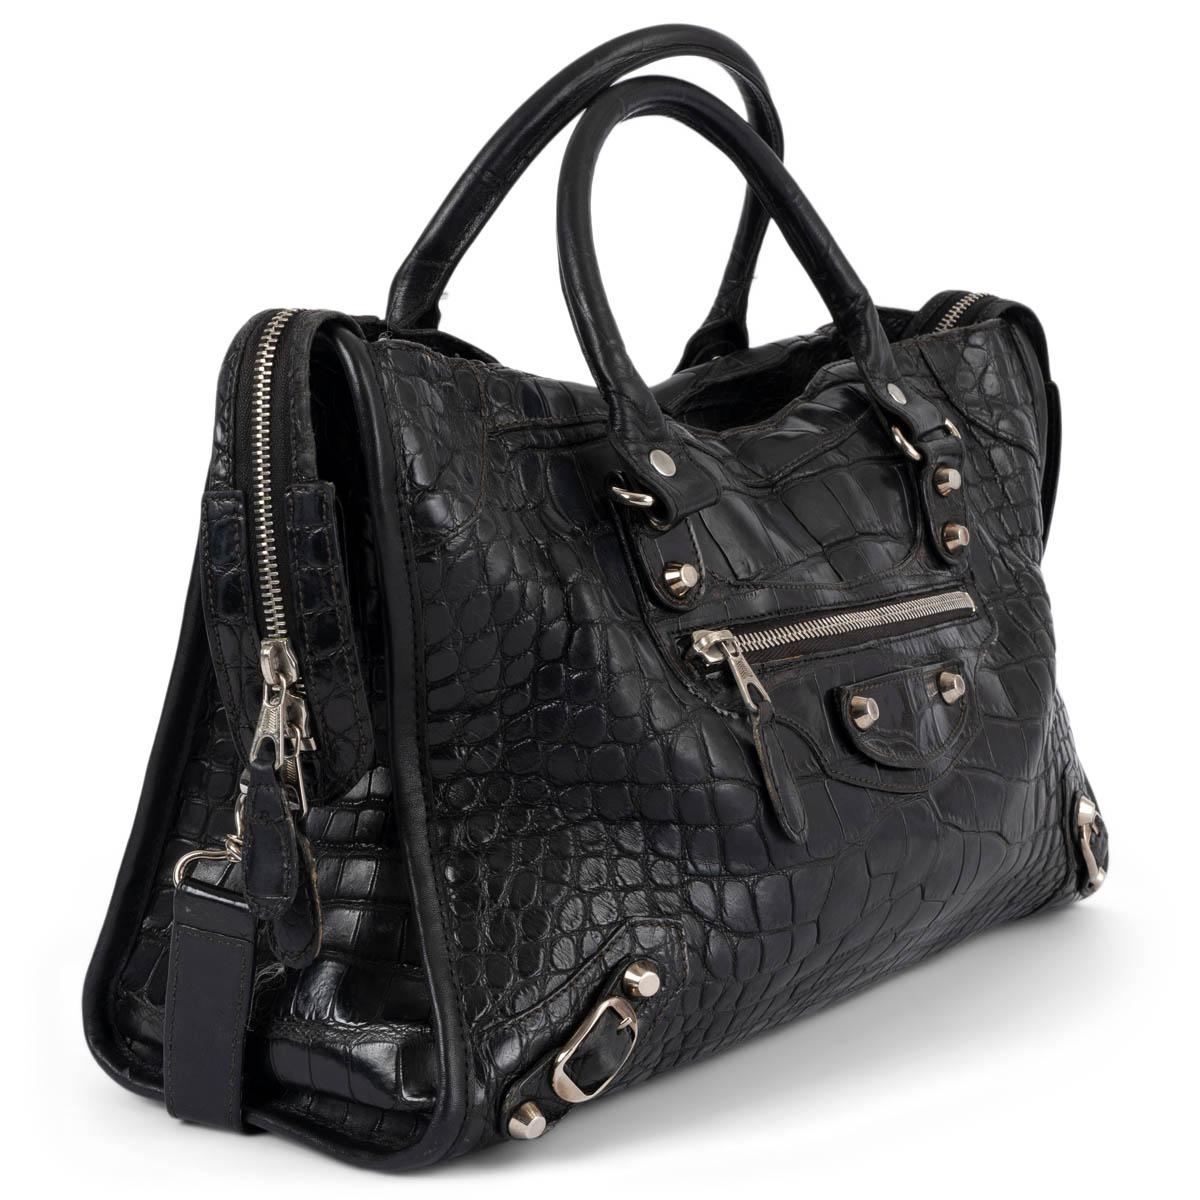 100% authentic Balenciaga Classic City bag in black matte crocodile. Opens with zipper on top and is lined in black canvas with one zip pocket against the back. Designed with a exterior front zip pocket, rolled handles and a detachable